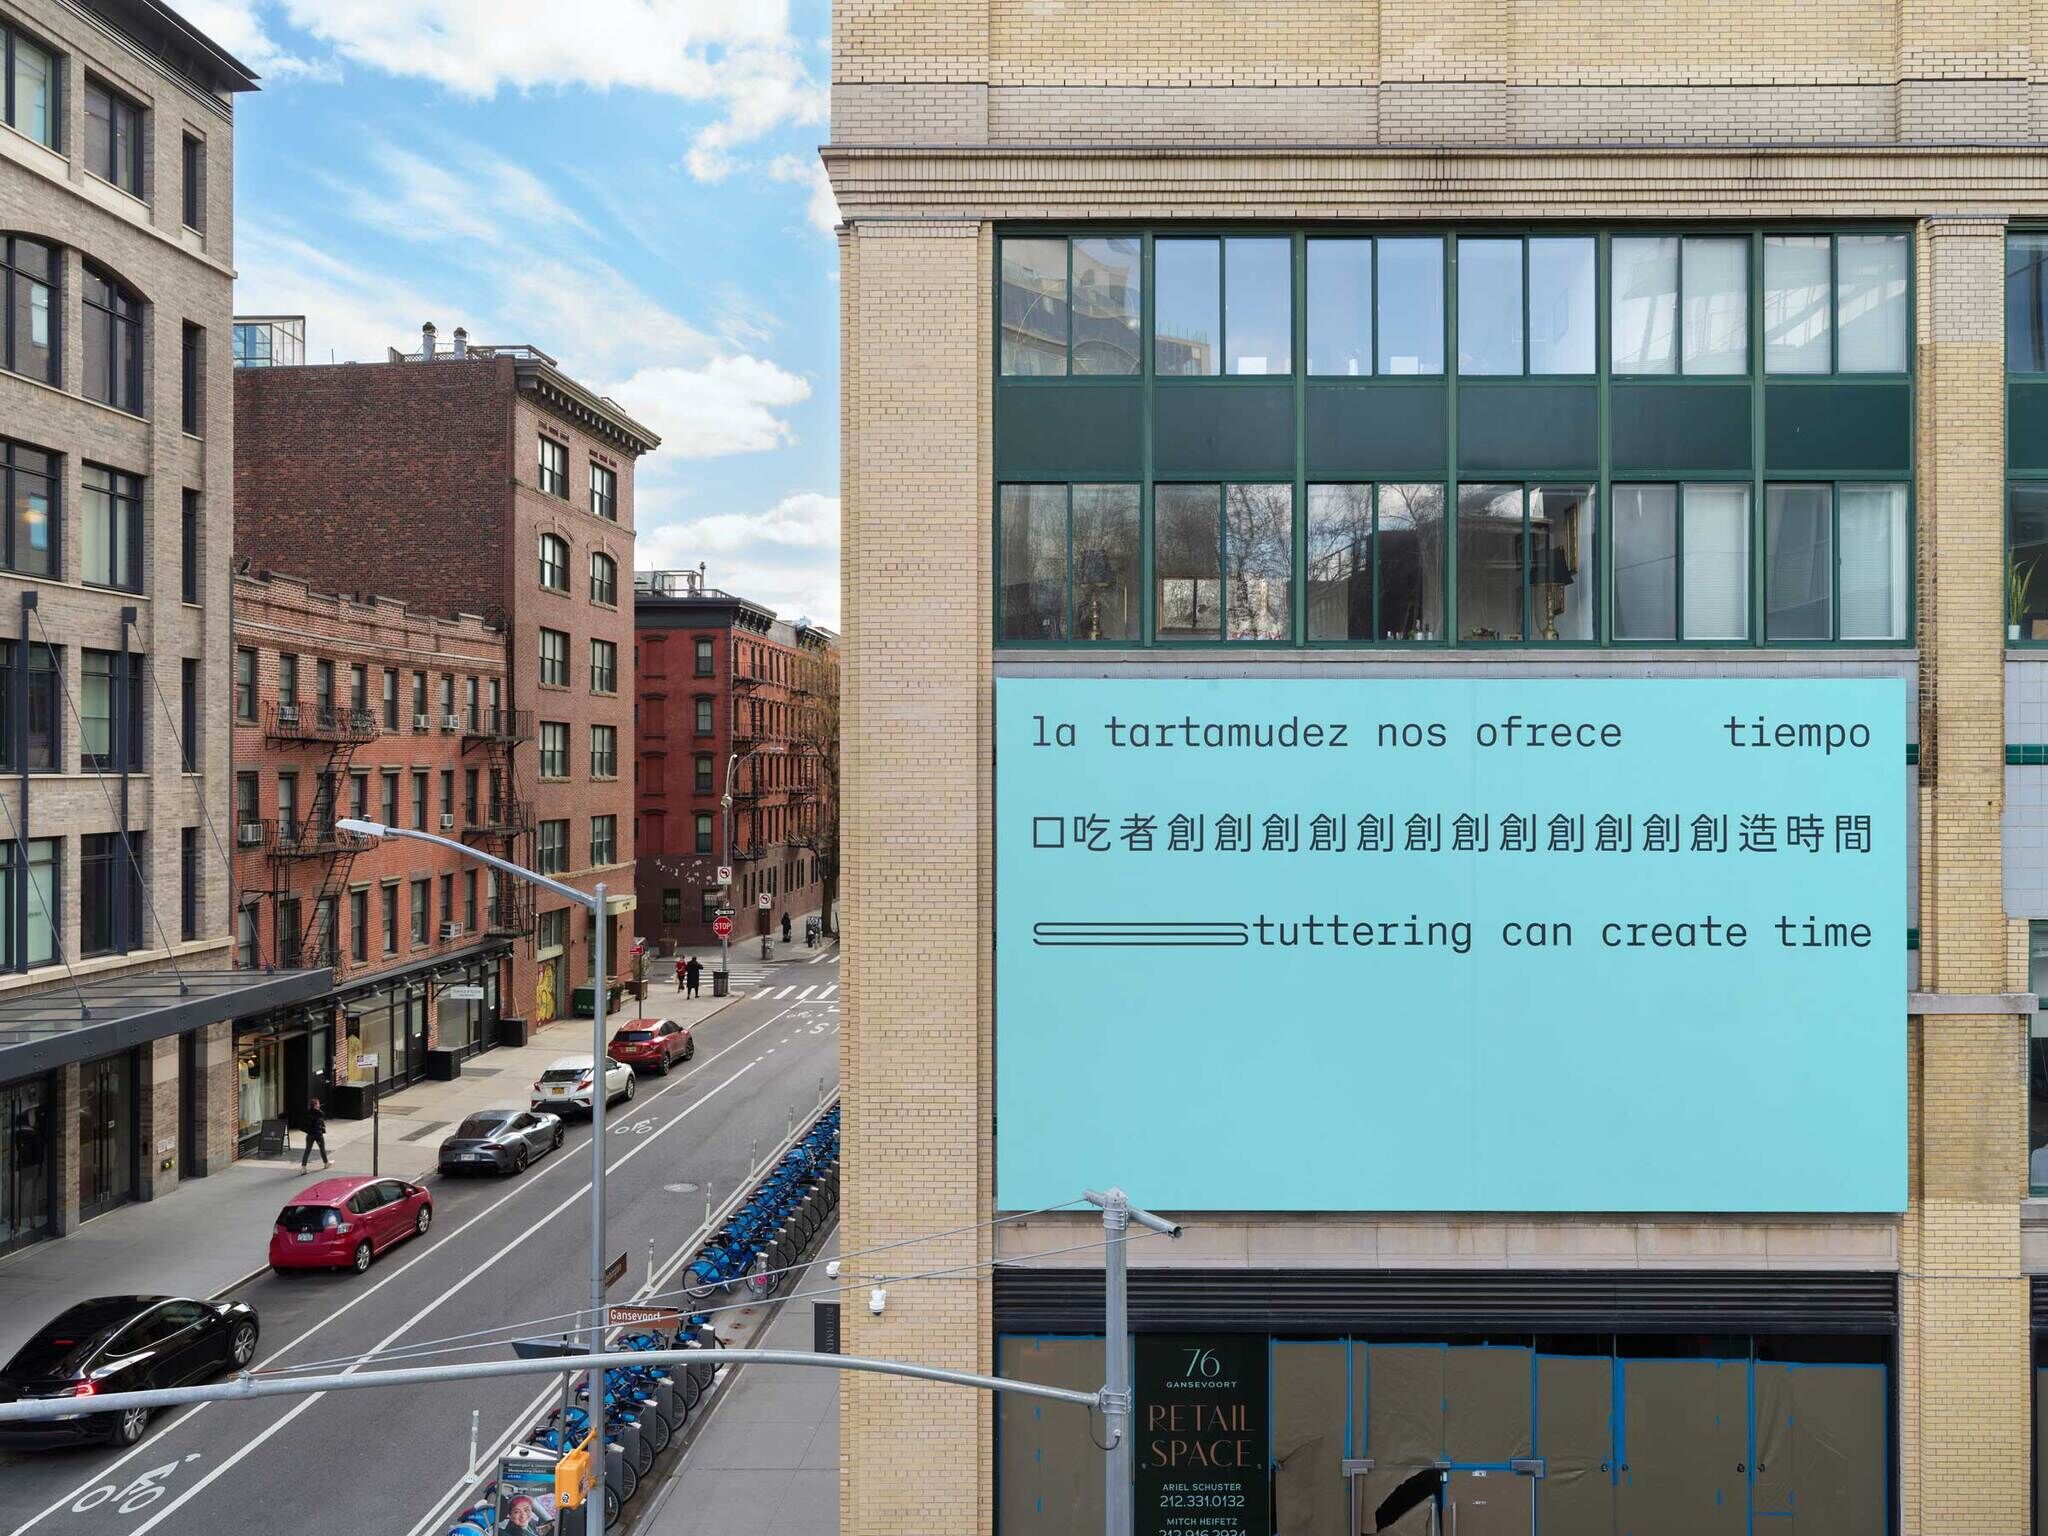 Urban street view with a building displaying a multilingual message about stuttering creating time.